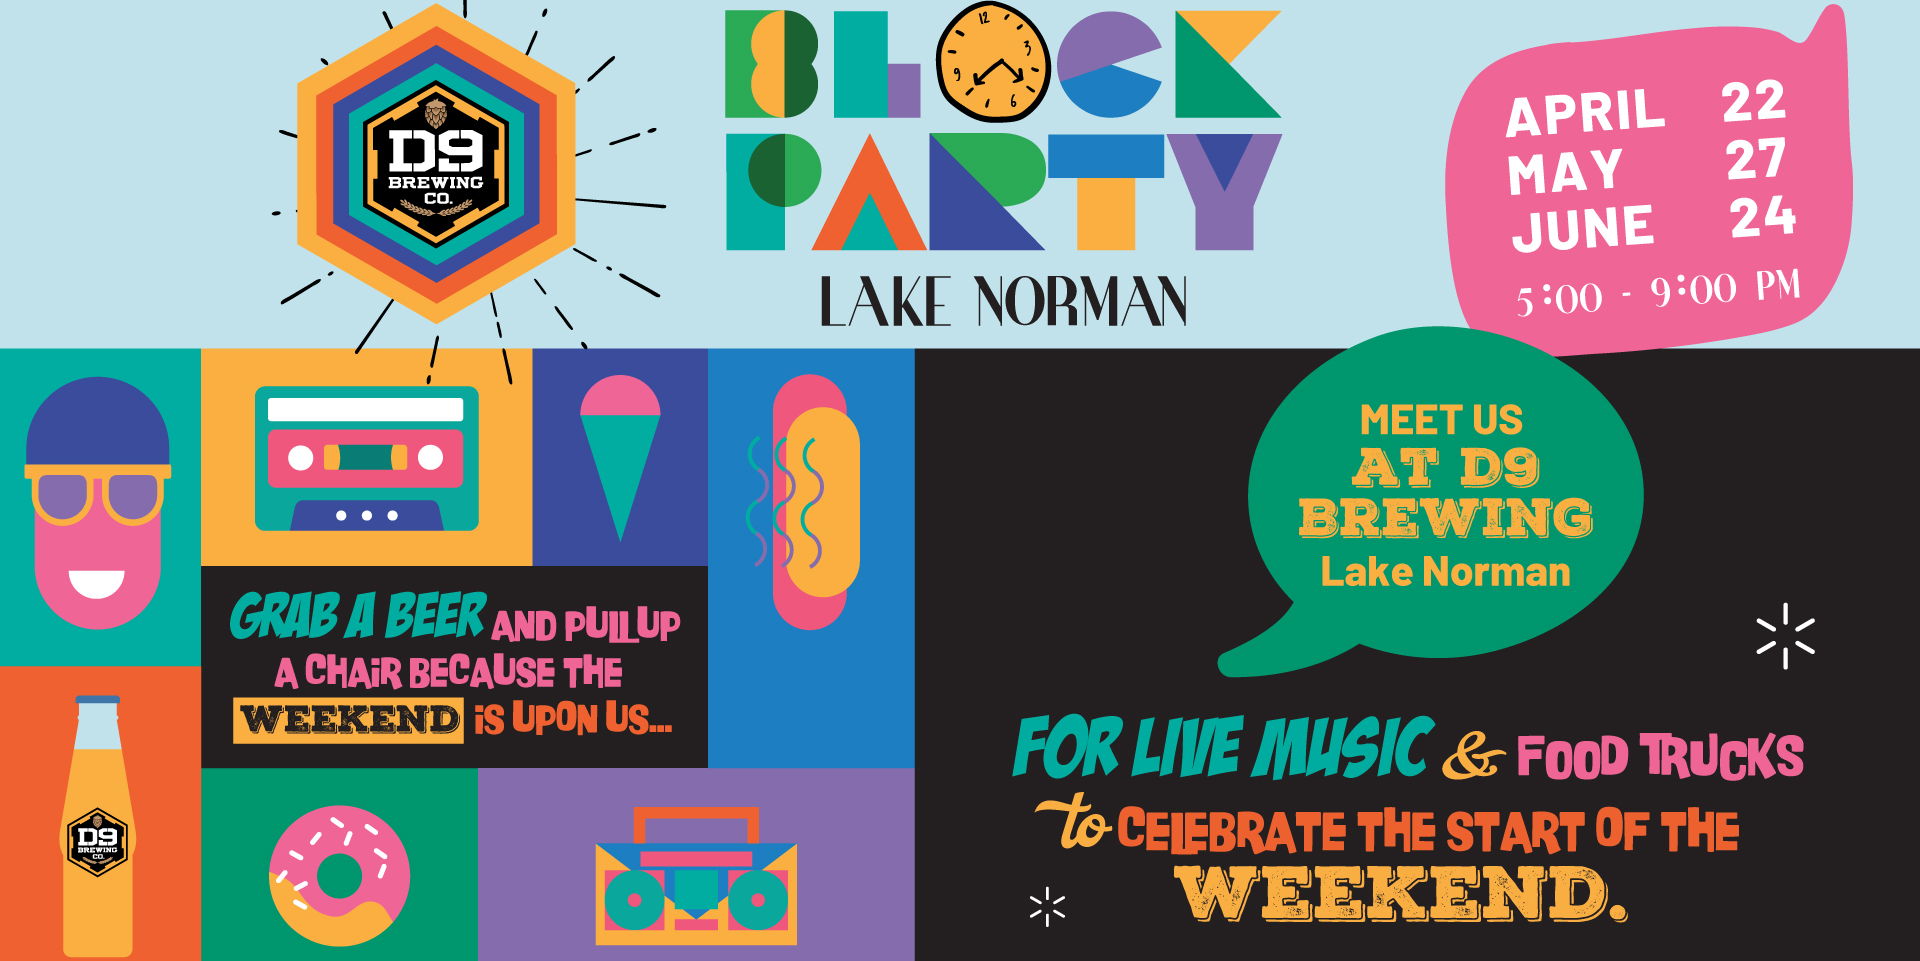 Block Party Lake Norman promotional image